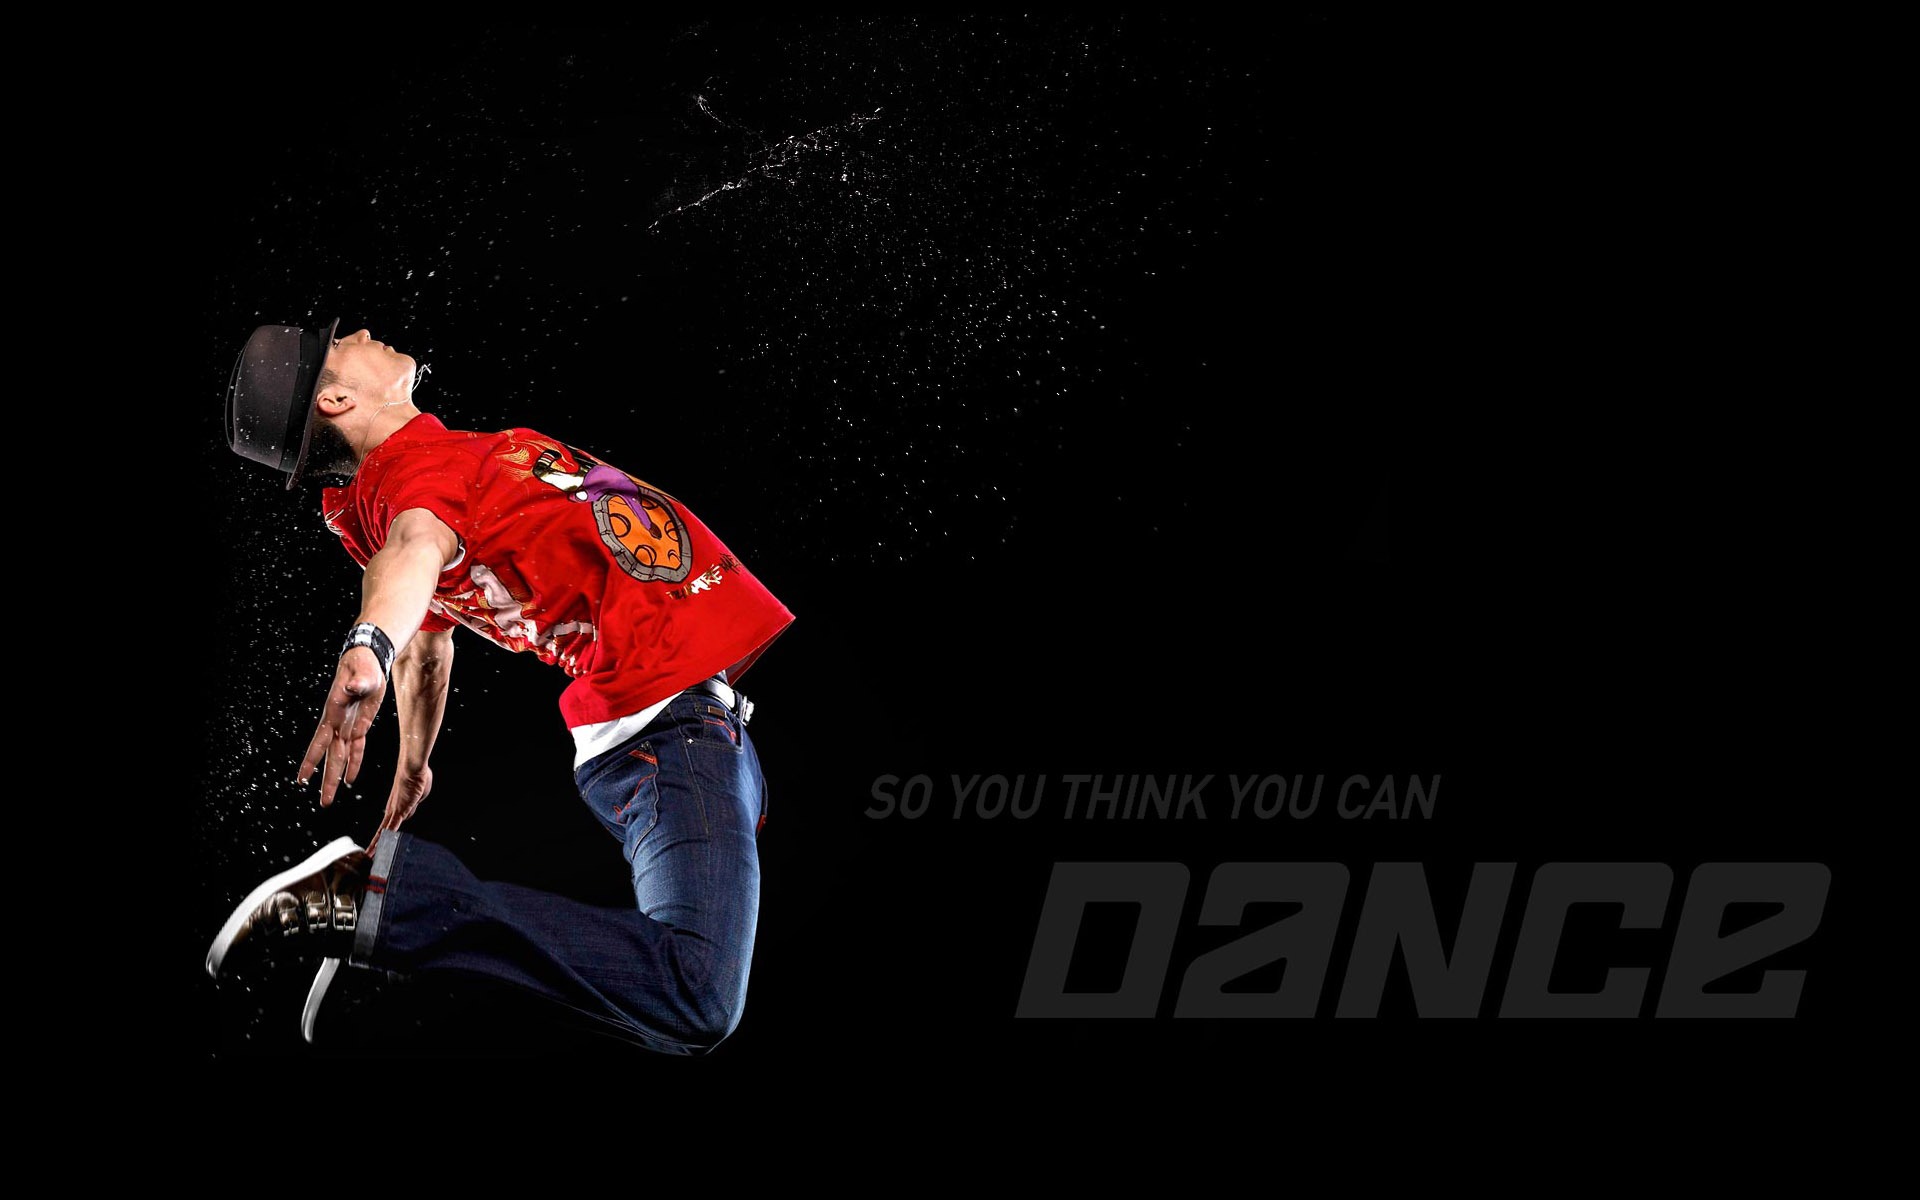 So You Think You Can Dance 舞林争霸 壁纸(一)6 - 1920x1200